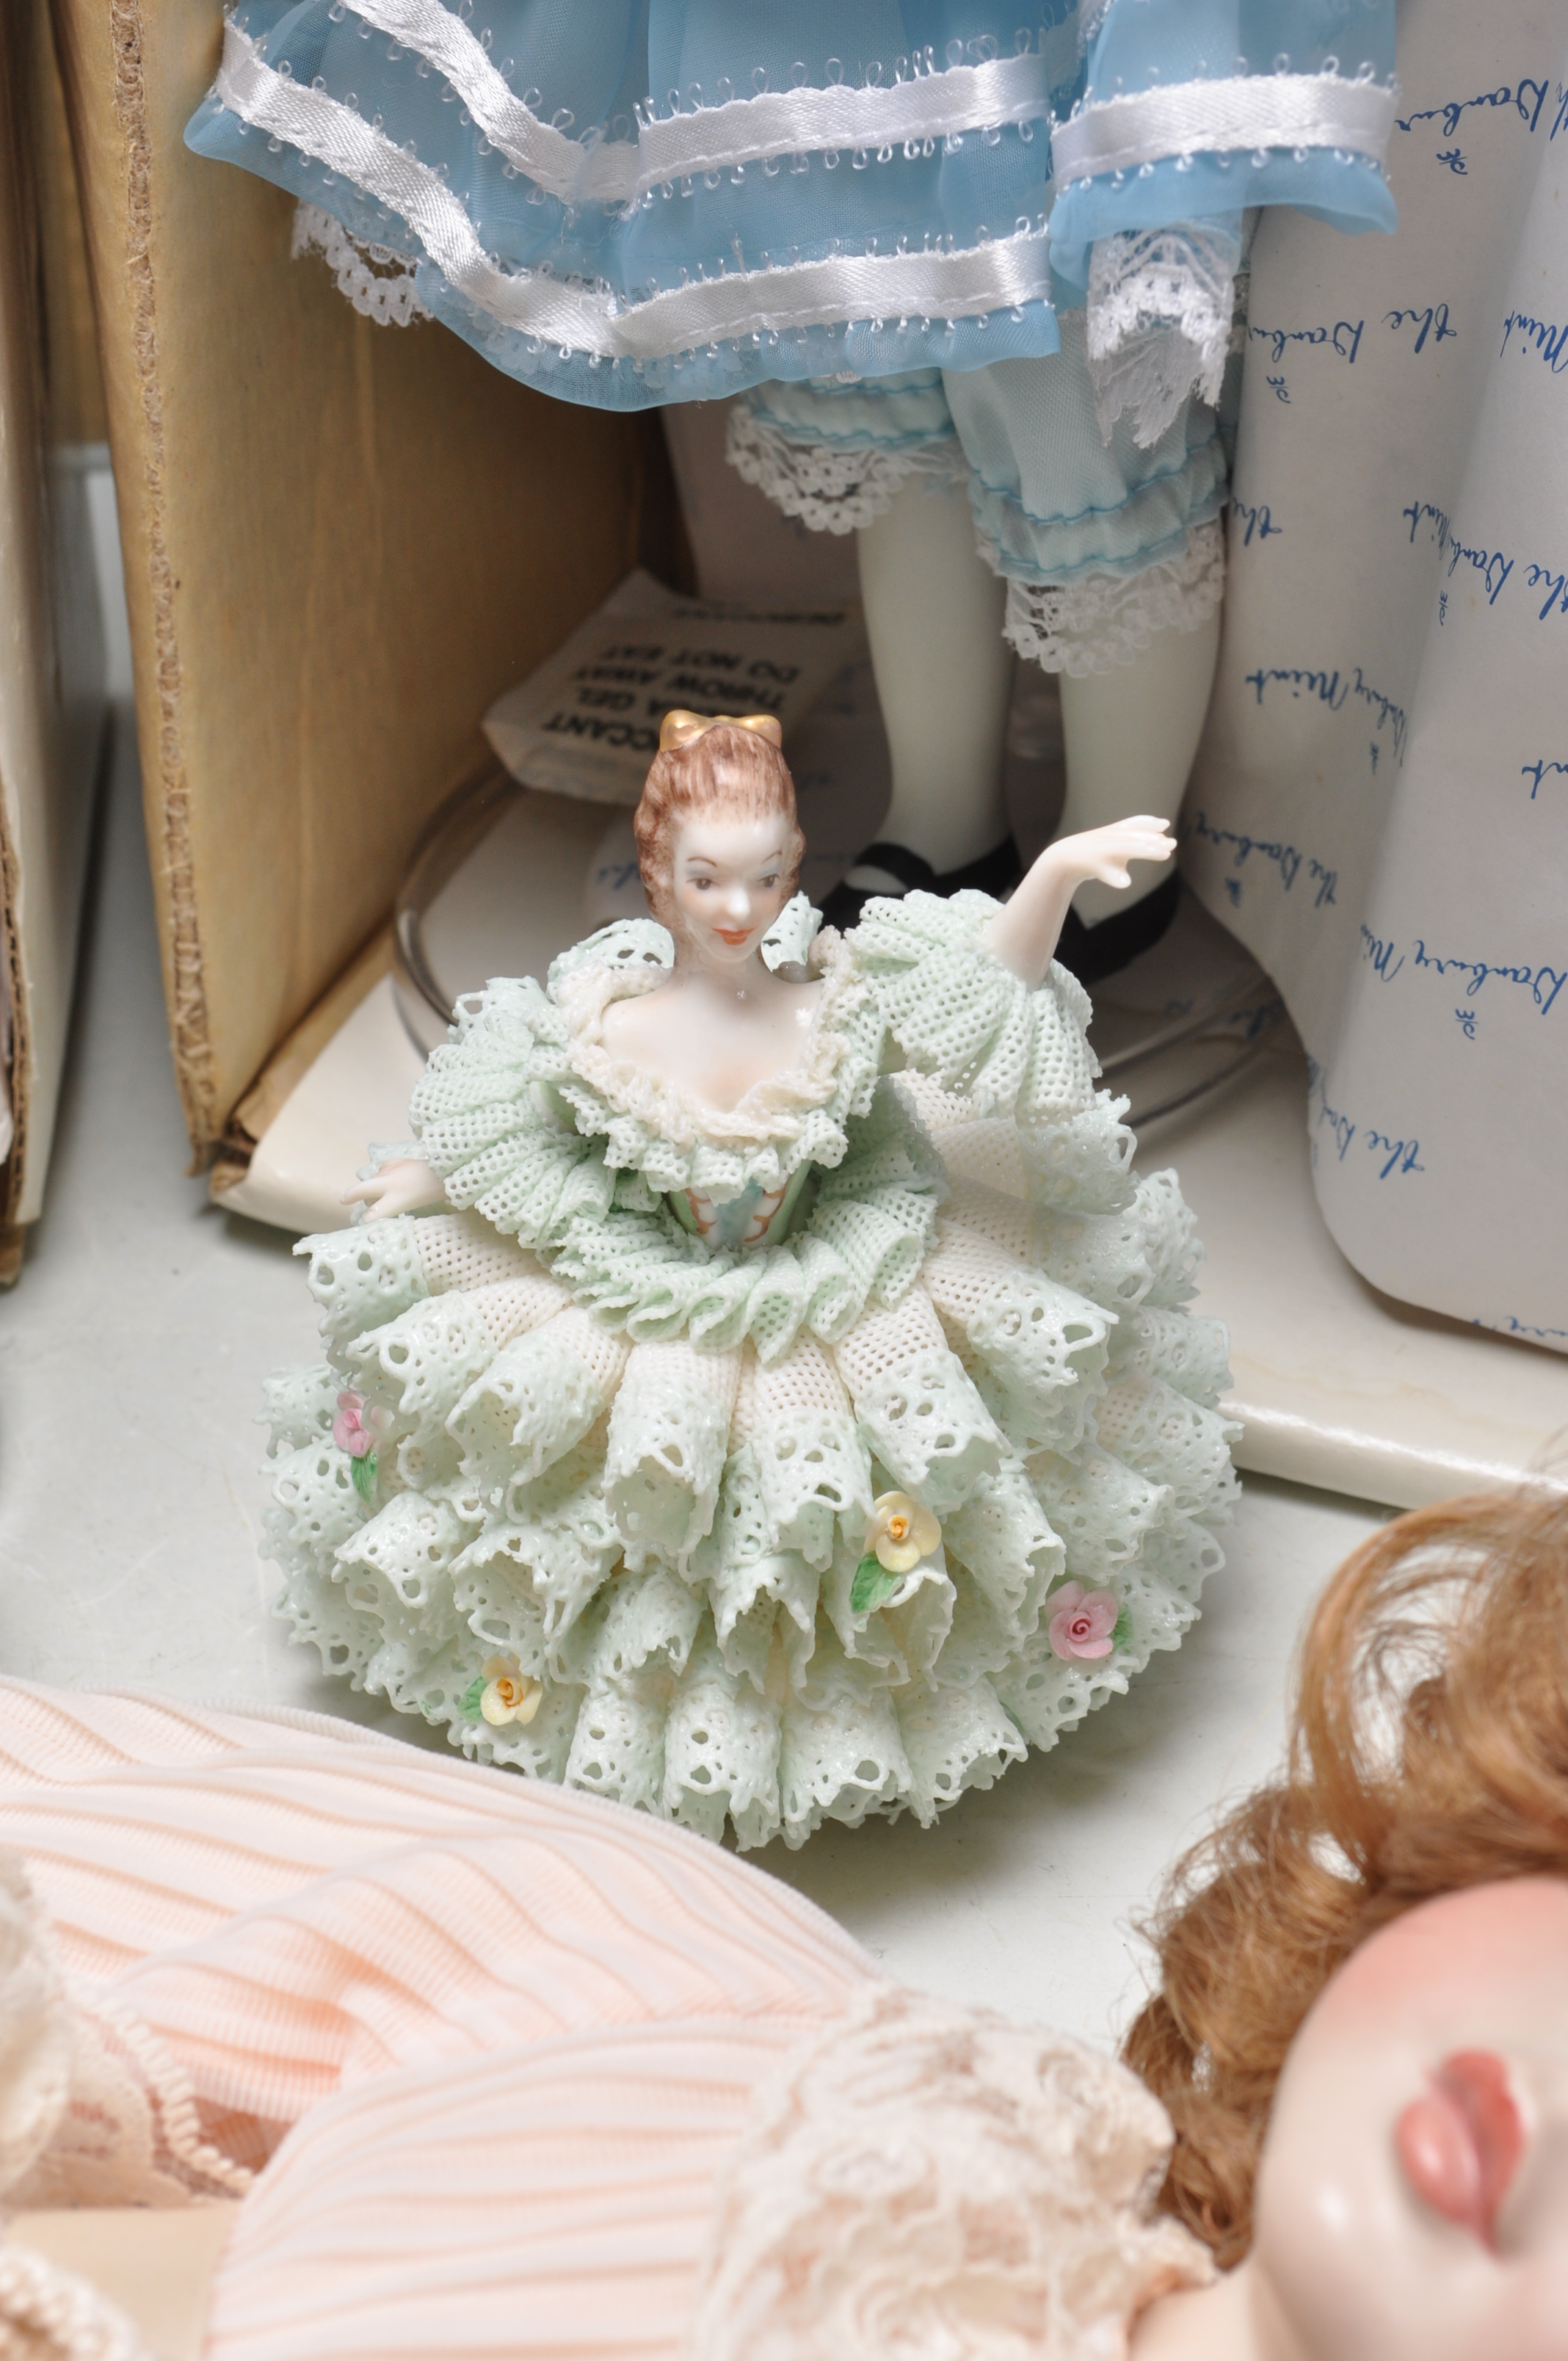 GROUP OF ROYAL DOULTON AND DANBURY MINT DOLLS - Image 4 of 9